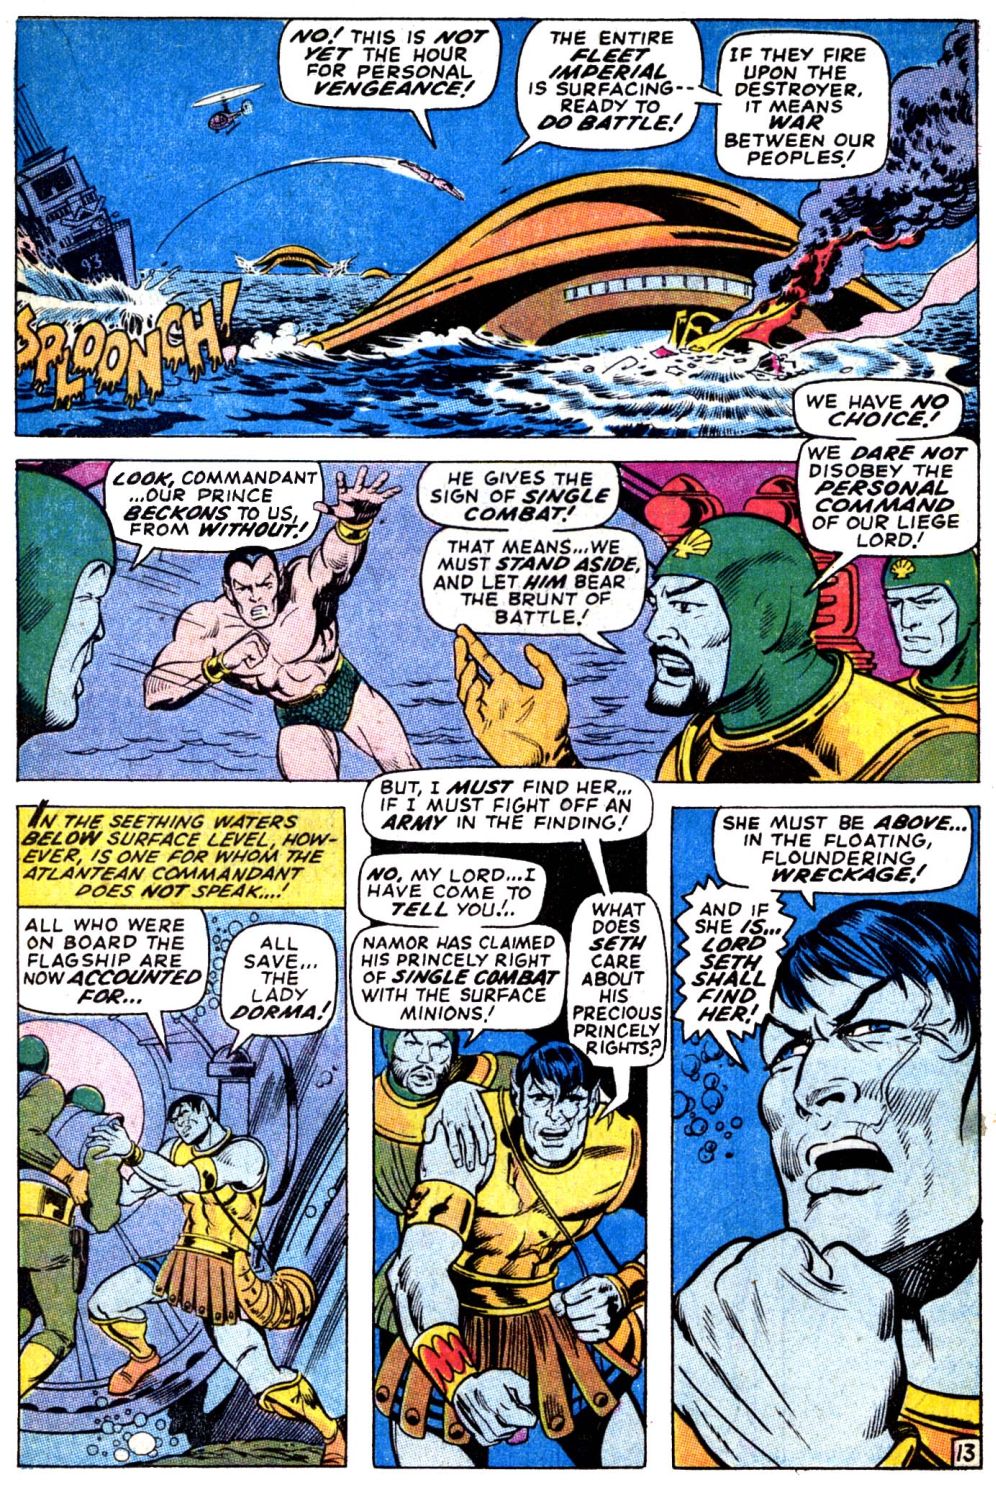 Read online The Sub-Mariner comic -  Issue #21 - 19